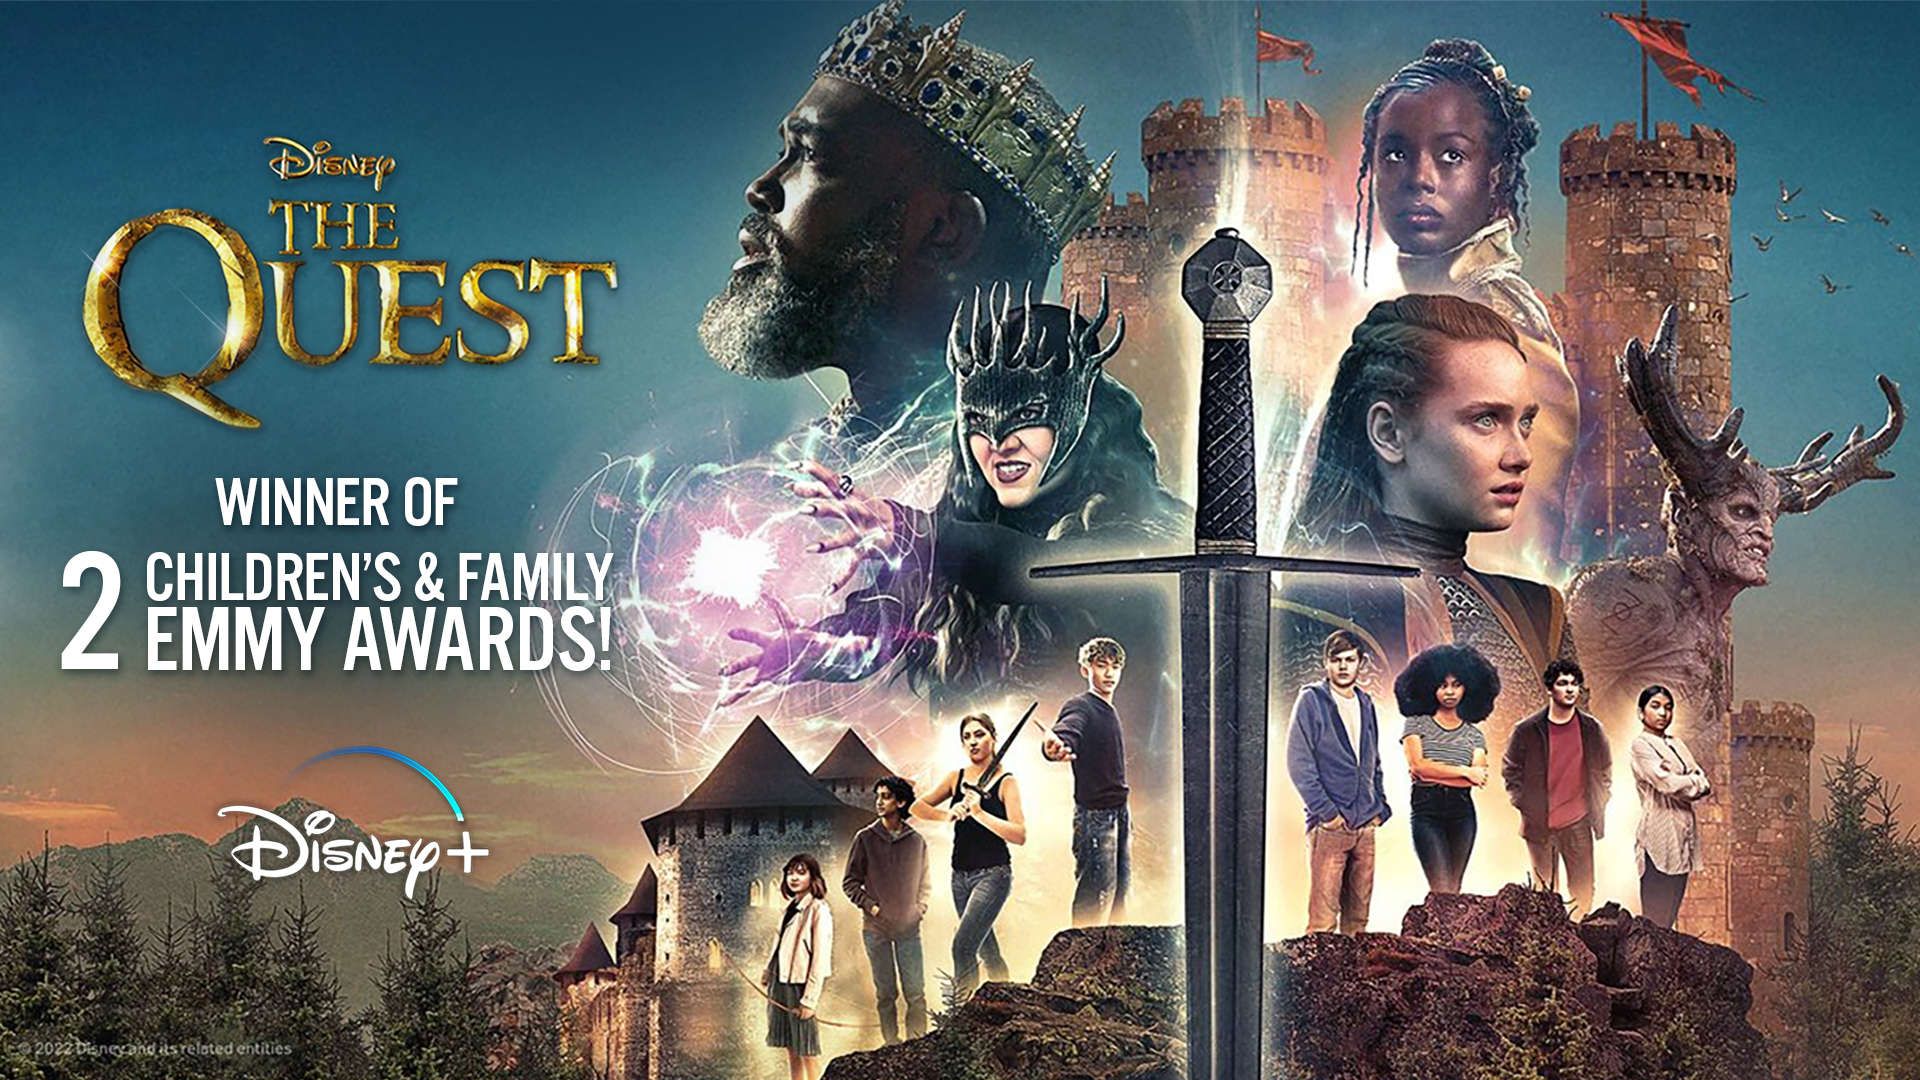 The Quest - Winner of 2 Emmy Awards!